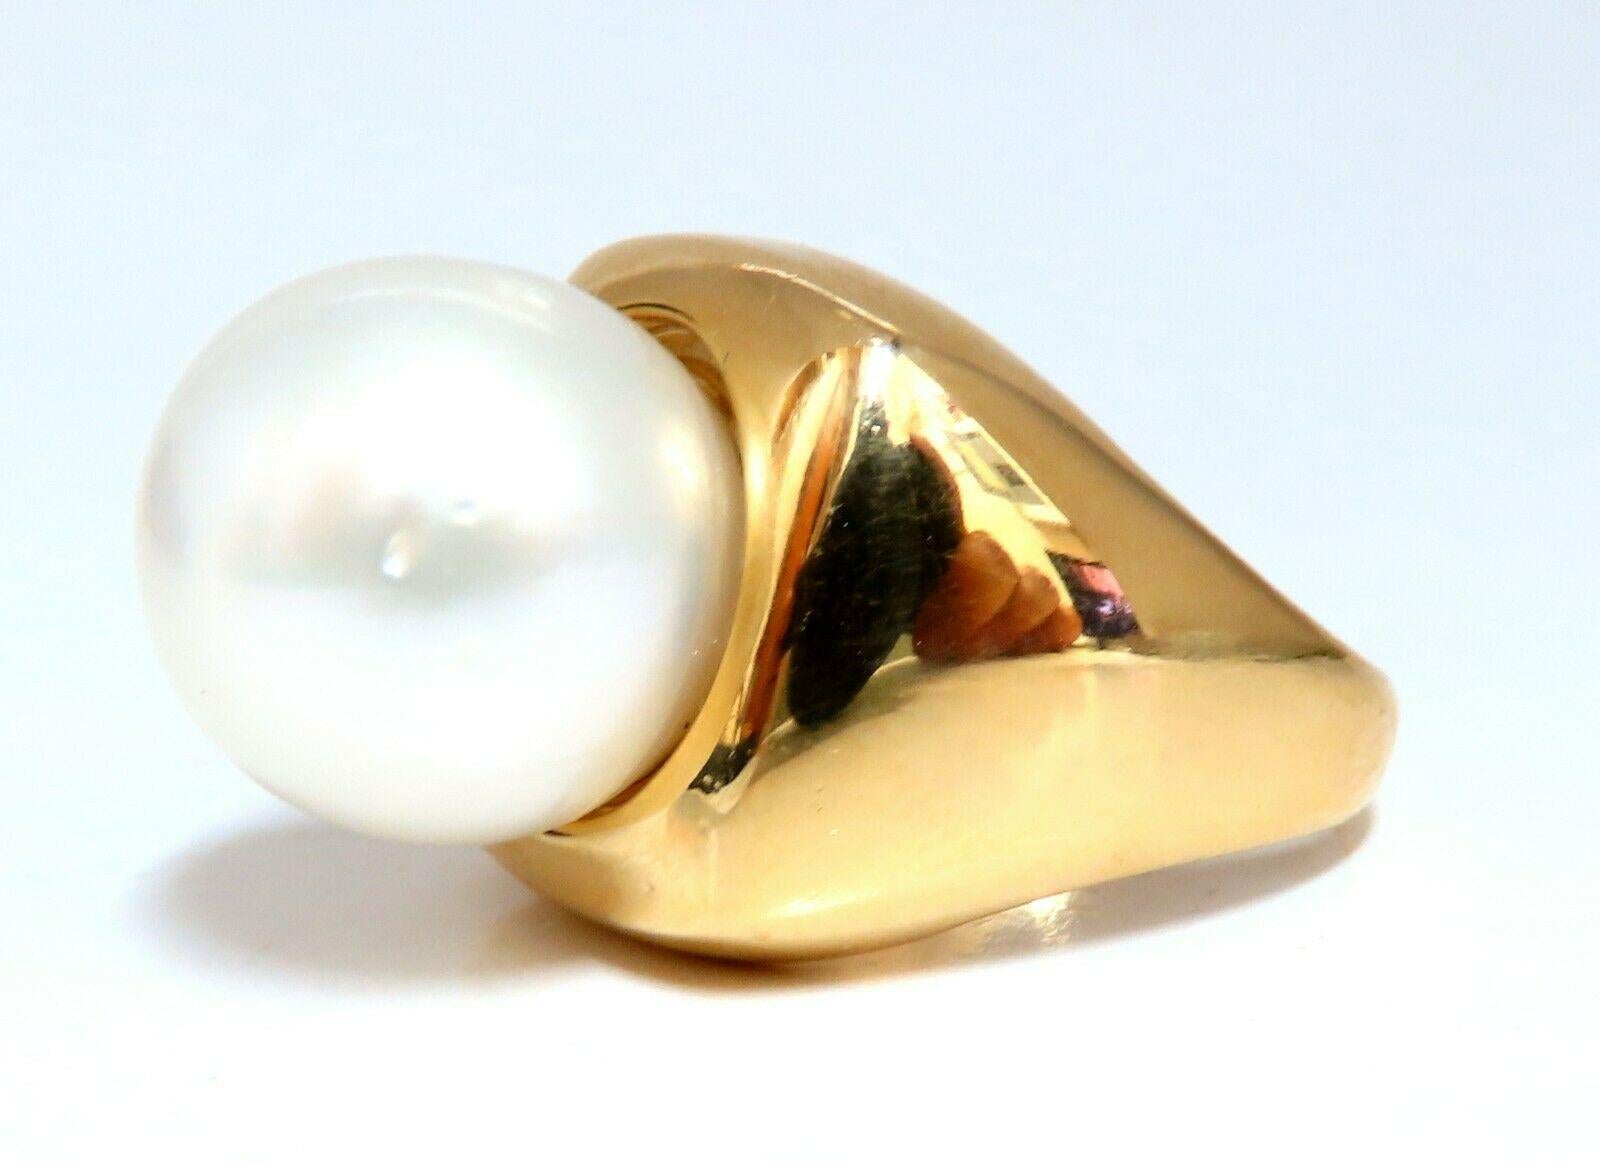 13.5mm Akoya Pearl Ring

14kt. yellow gold

12.3 grams.

Current ring size: 6.5

We may resize.

Depth of ring: 15.8mm

Deck of ring: 17mm diameter